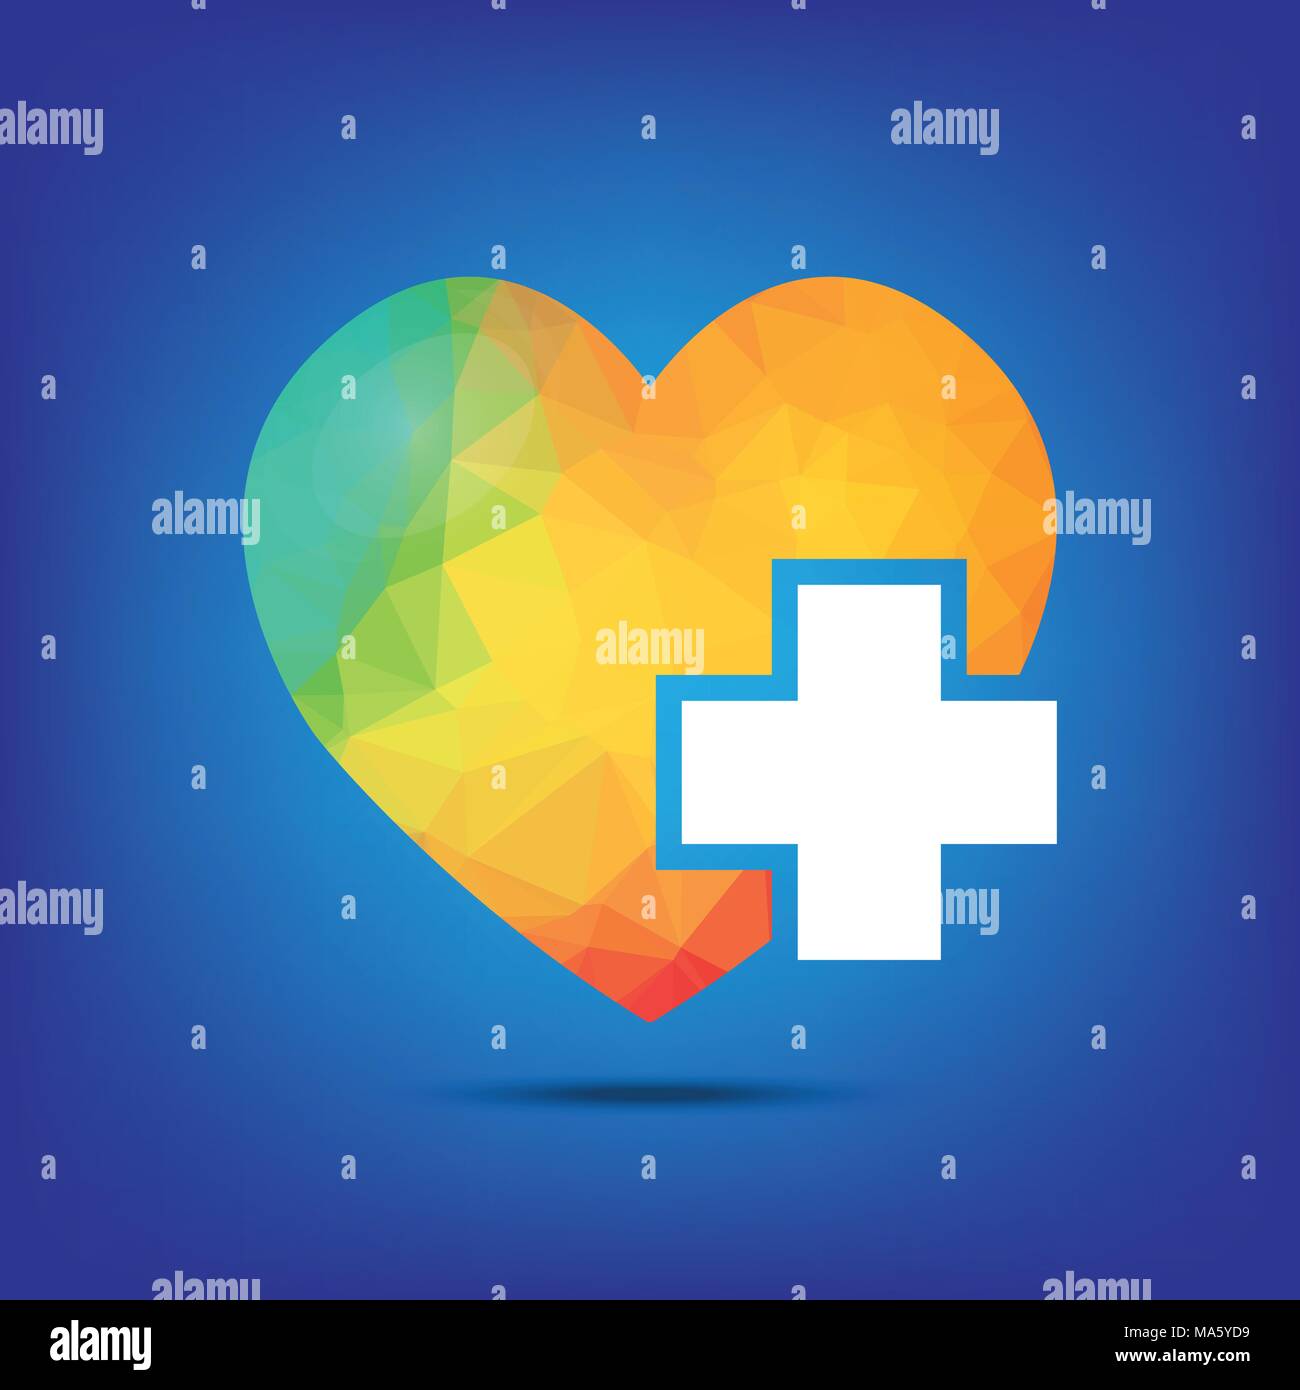 Heart polygon and heartbeat symbol on reflective surface. EPS 10. Stock Vector